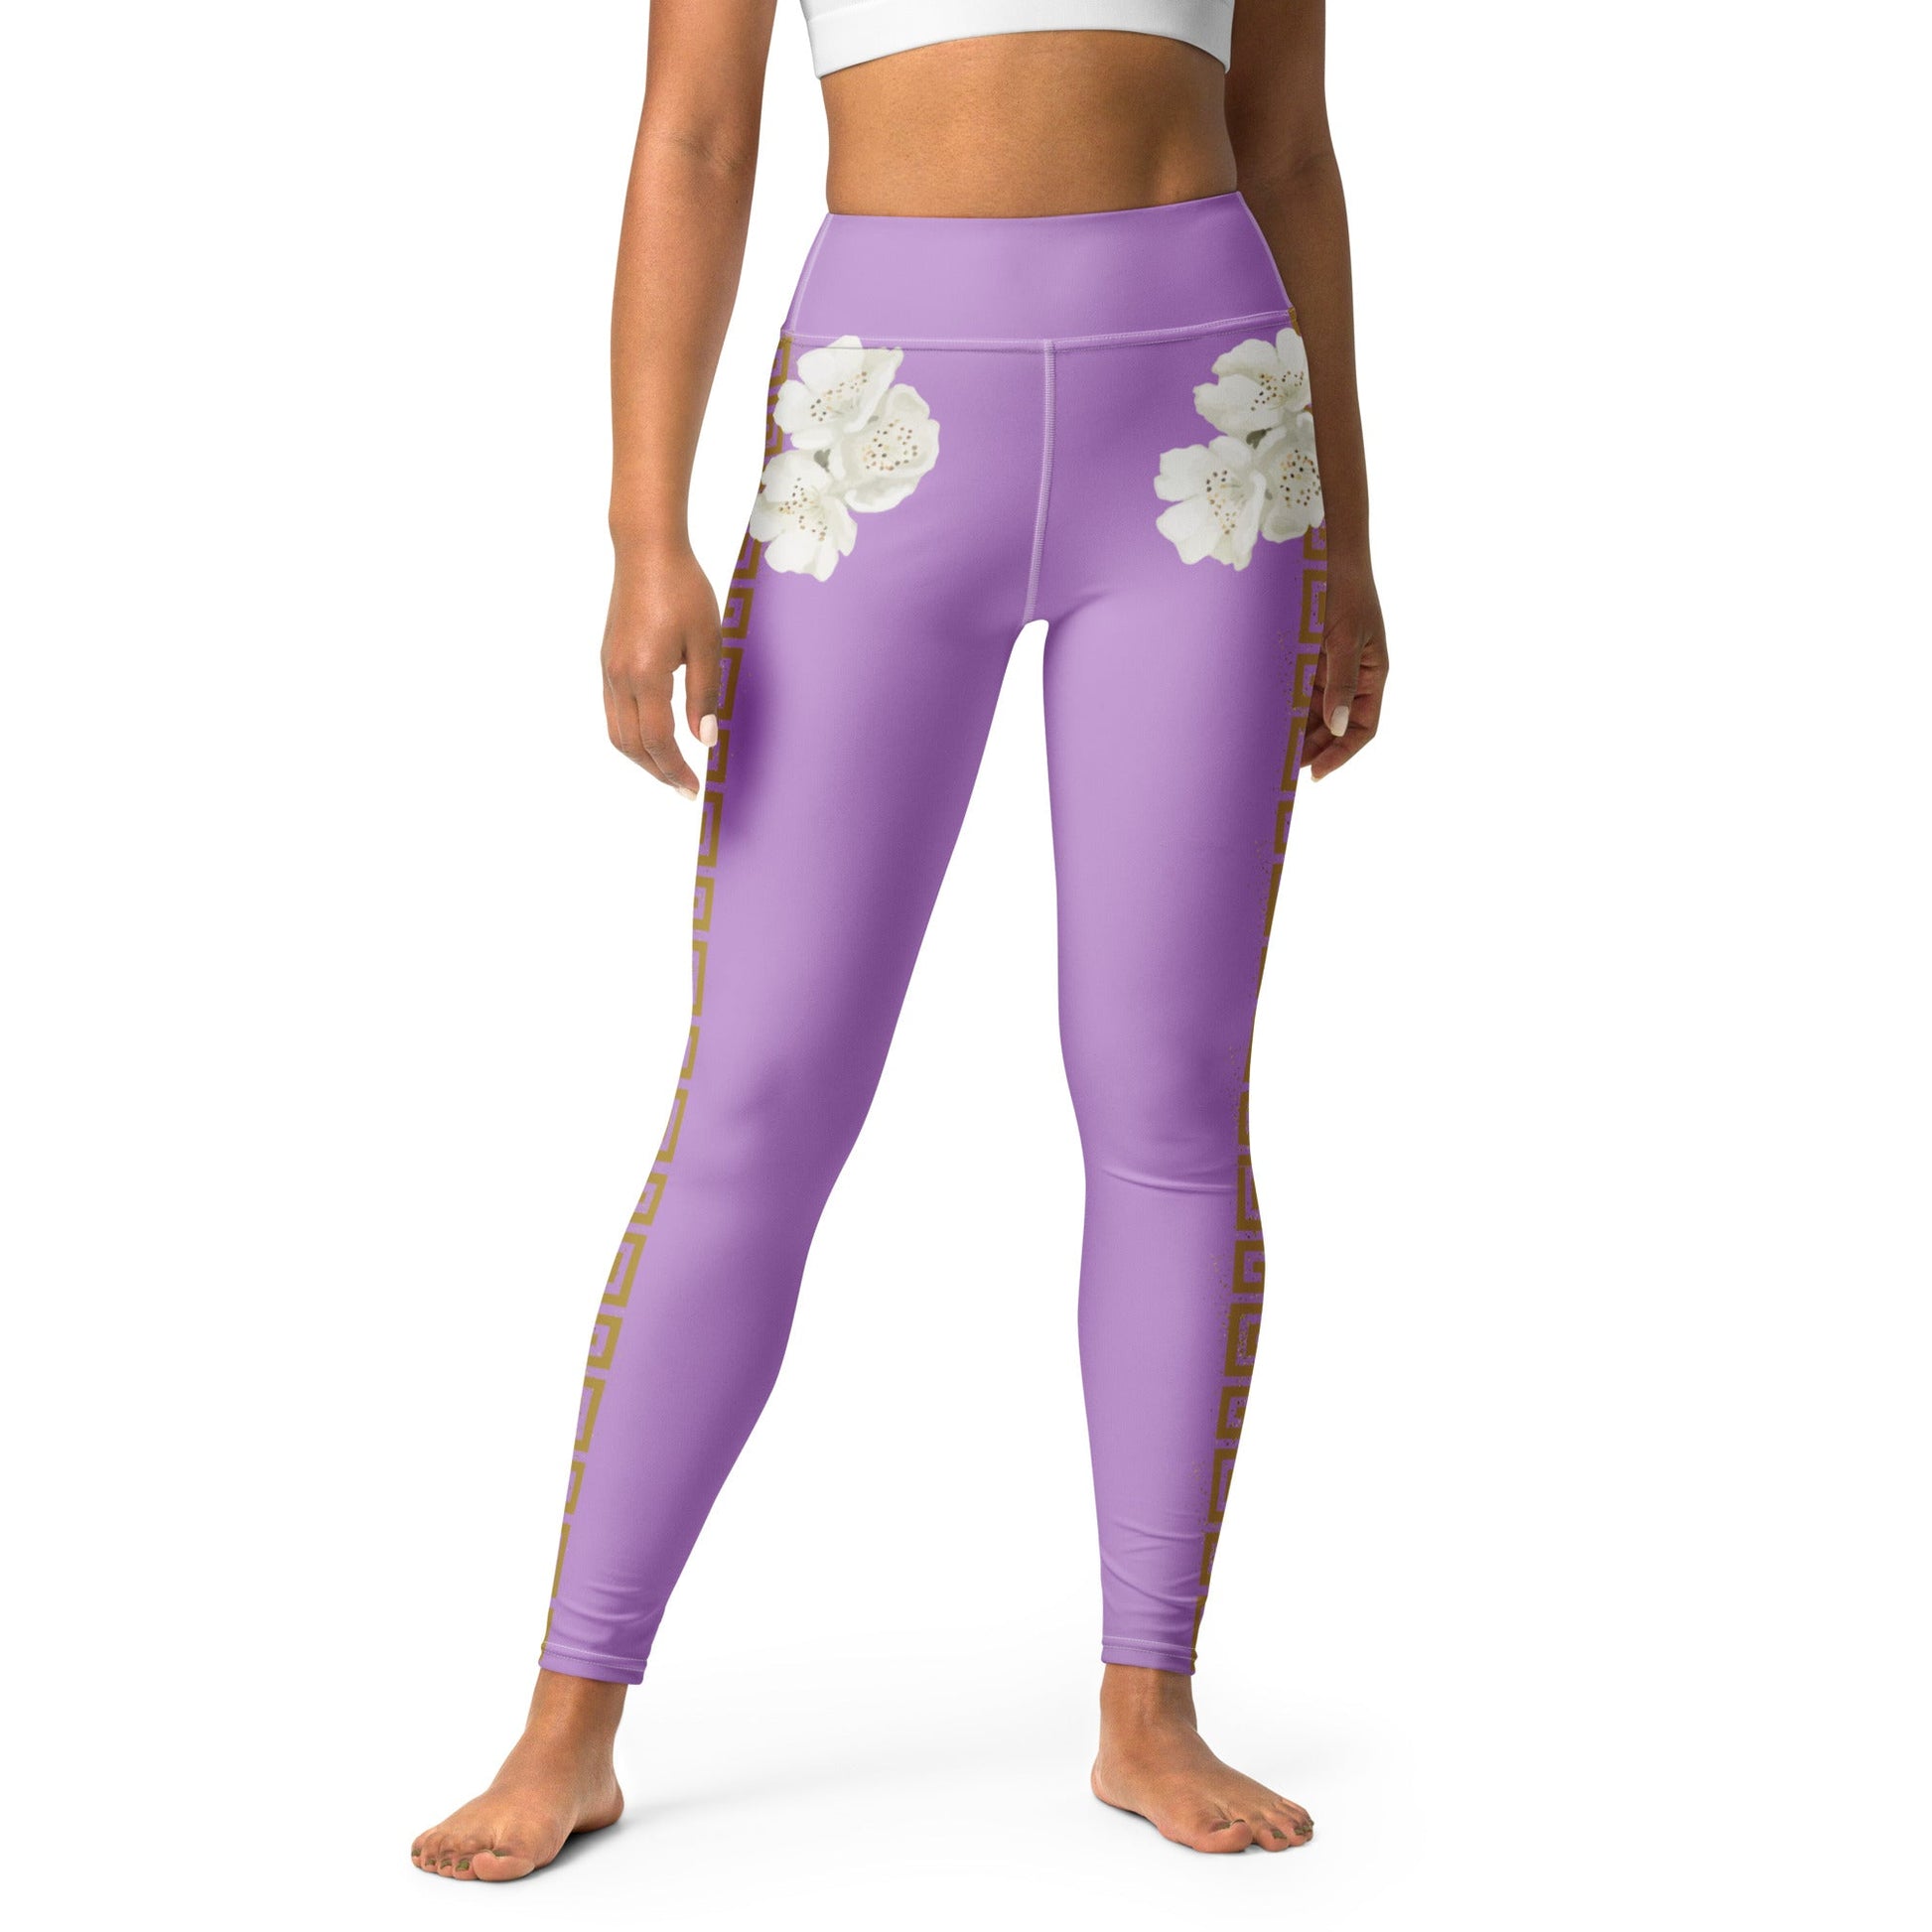 The Megara Yoga Leggings active wearboo to youAdult LeggingsLittle Lady Shay Boutique